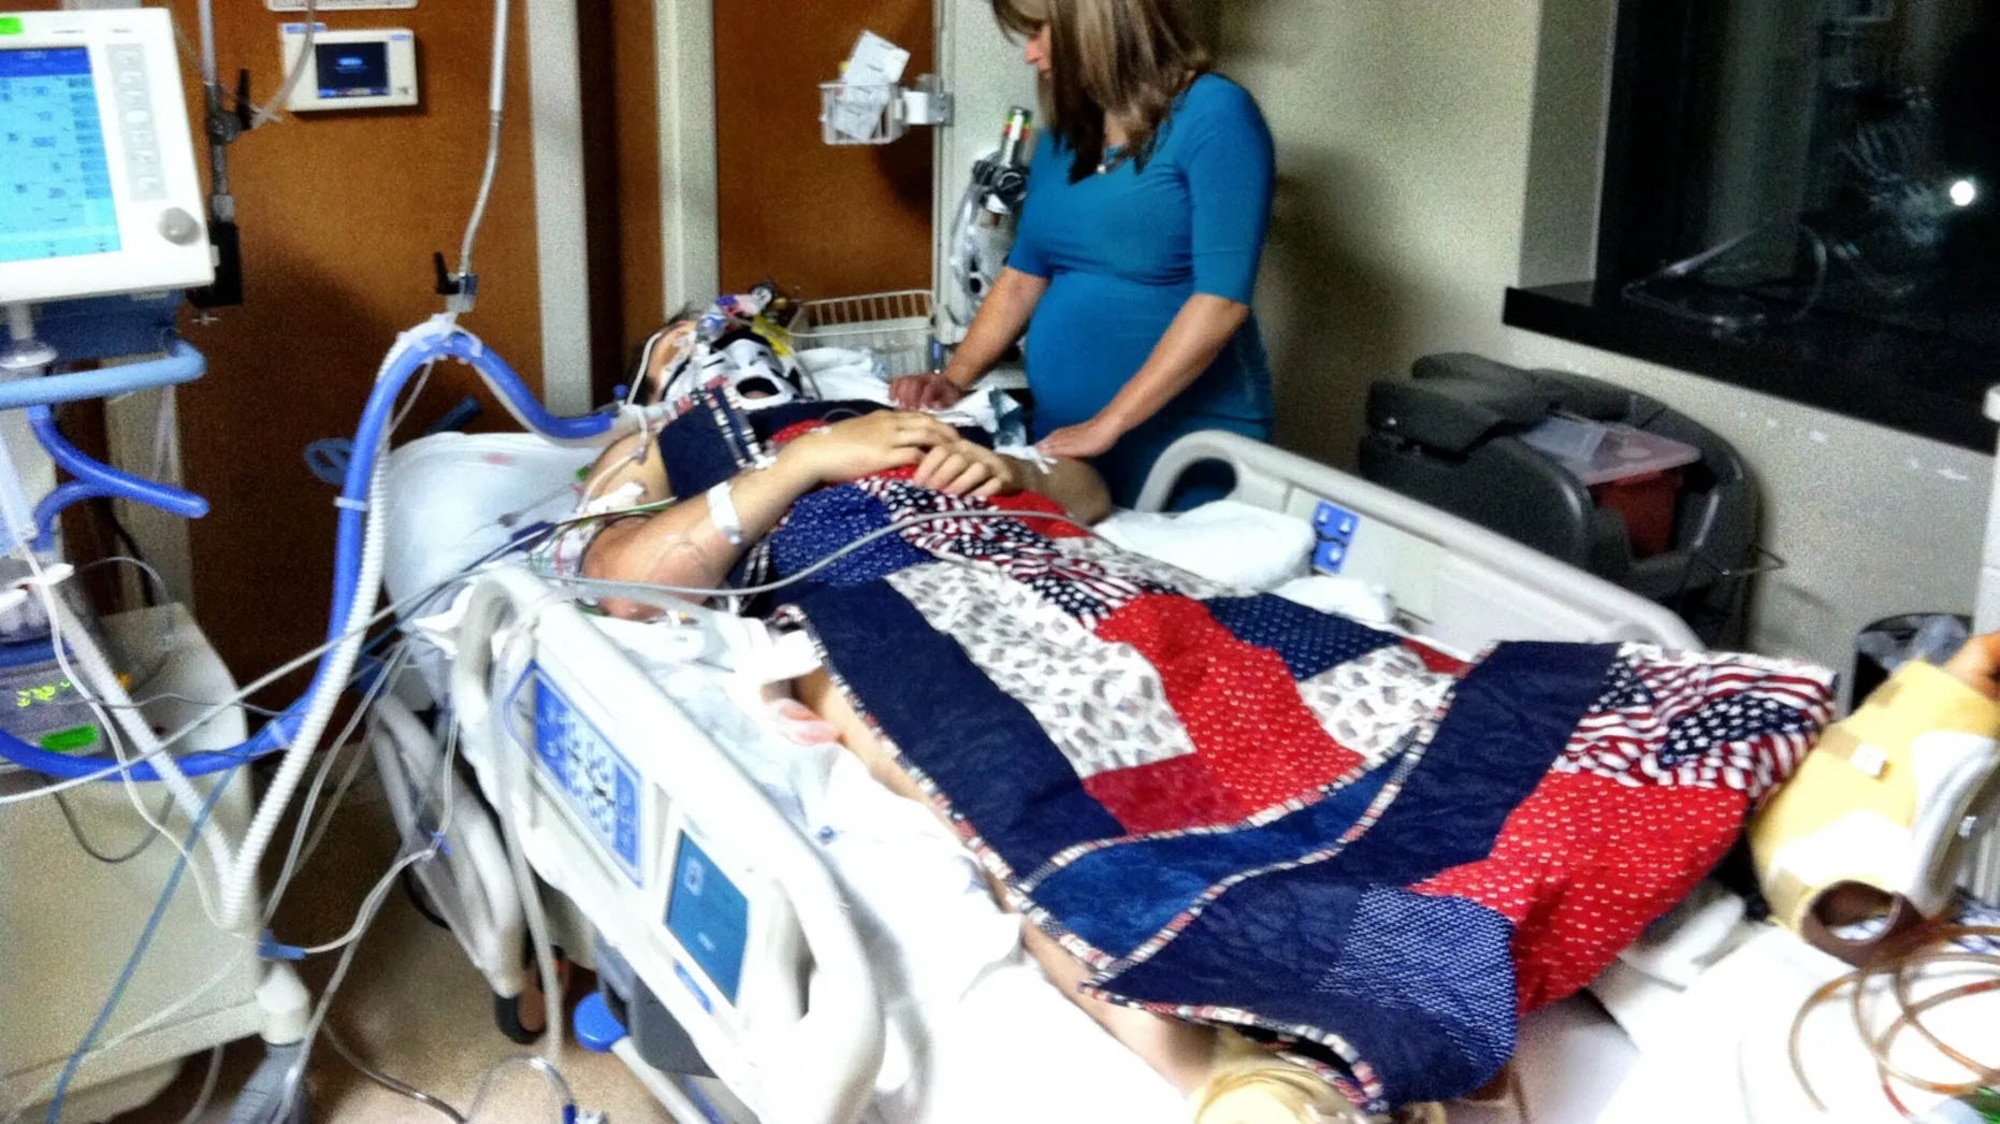 U.S. Air Force 1st Lt. Nate Nelson, 22nd Special Tactics Squadron intelligence officer, is comforted by his wife, Jennifer, at Walter Reed National Medical Center, Maryland. He was critically injured from a rocket attack in Afghanistan during Operation Enduring Freedom. (Courtesy photo)